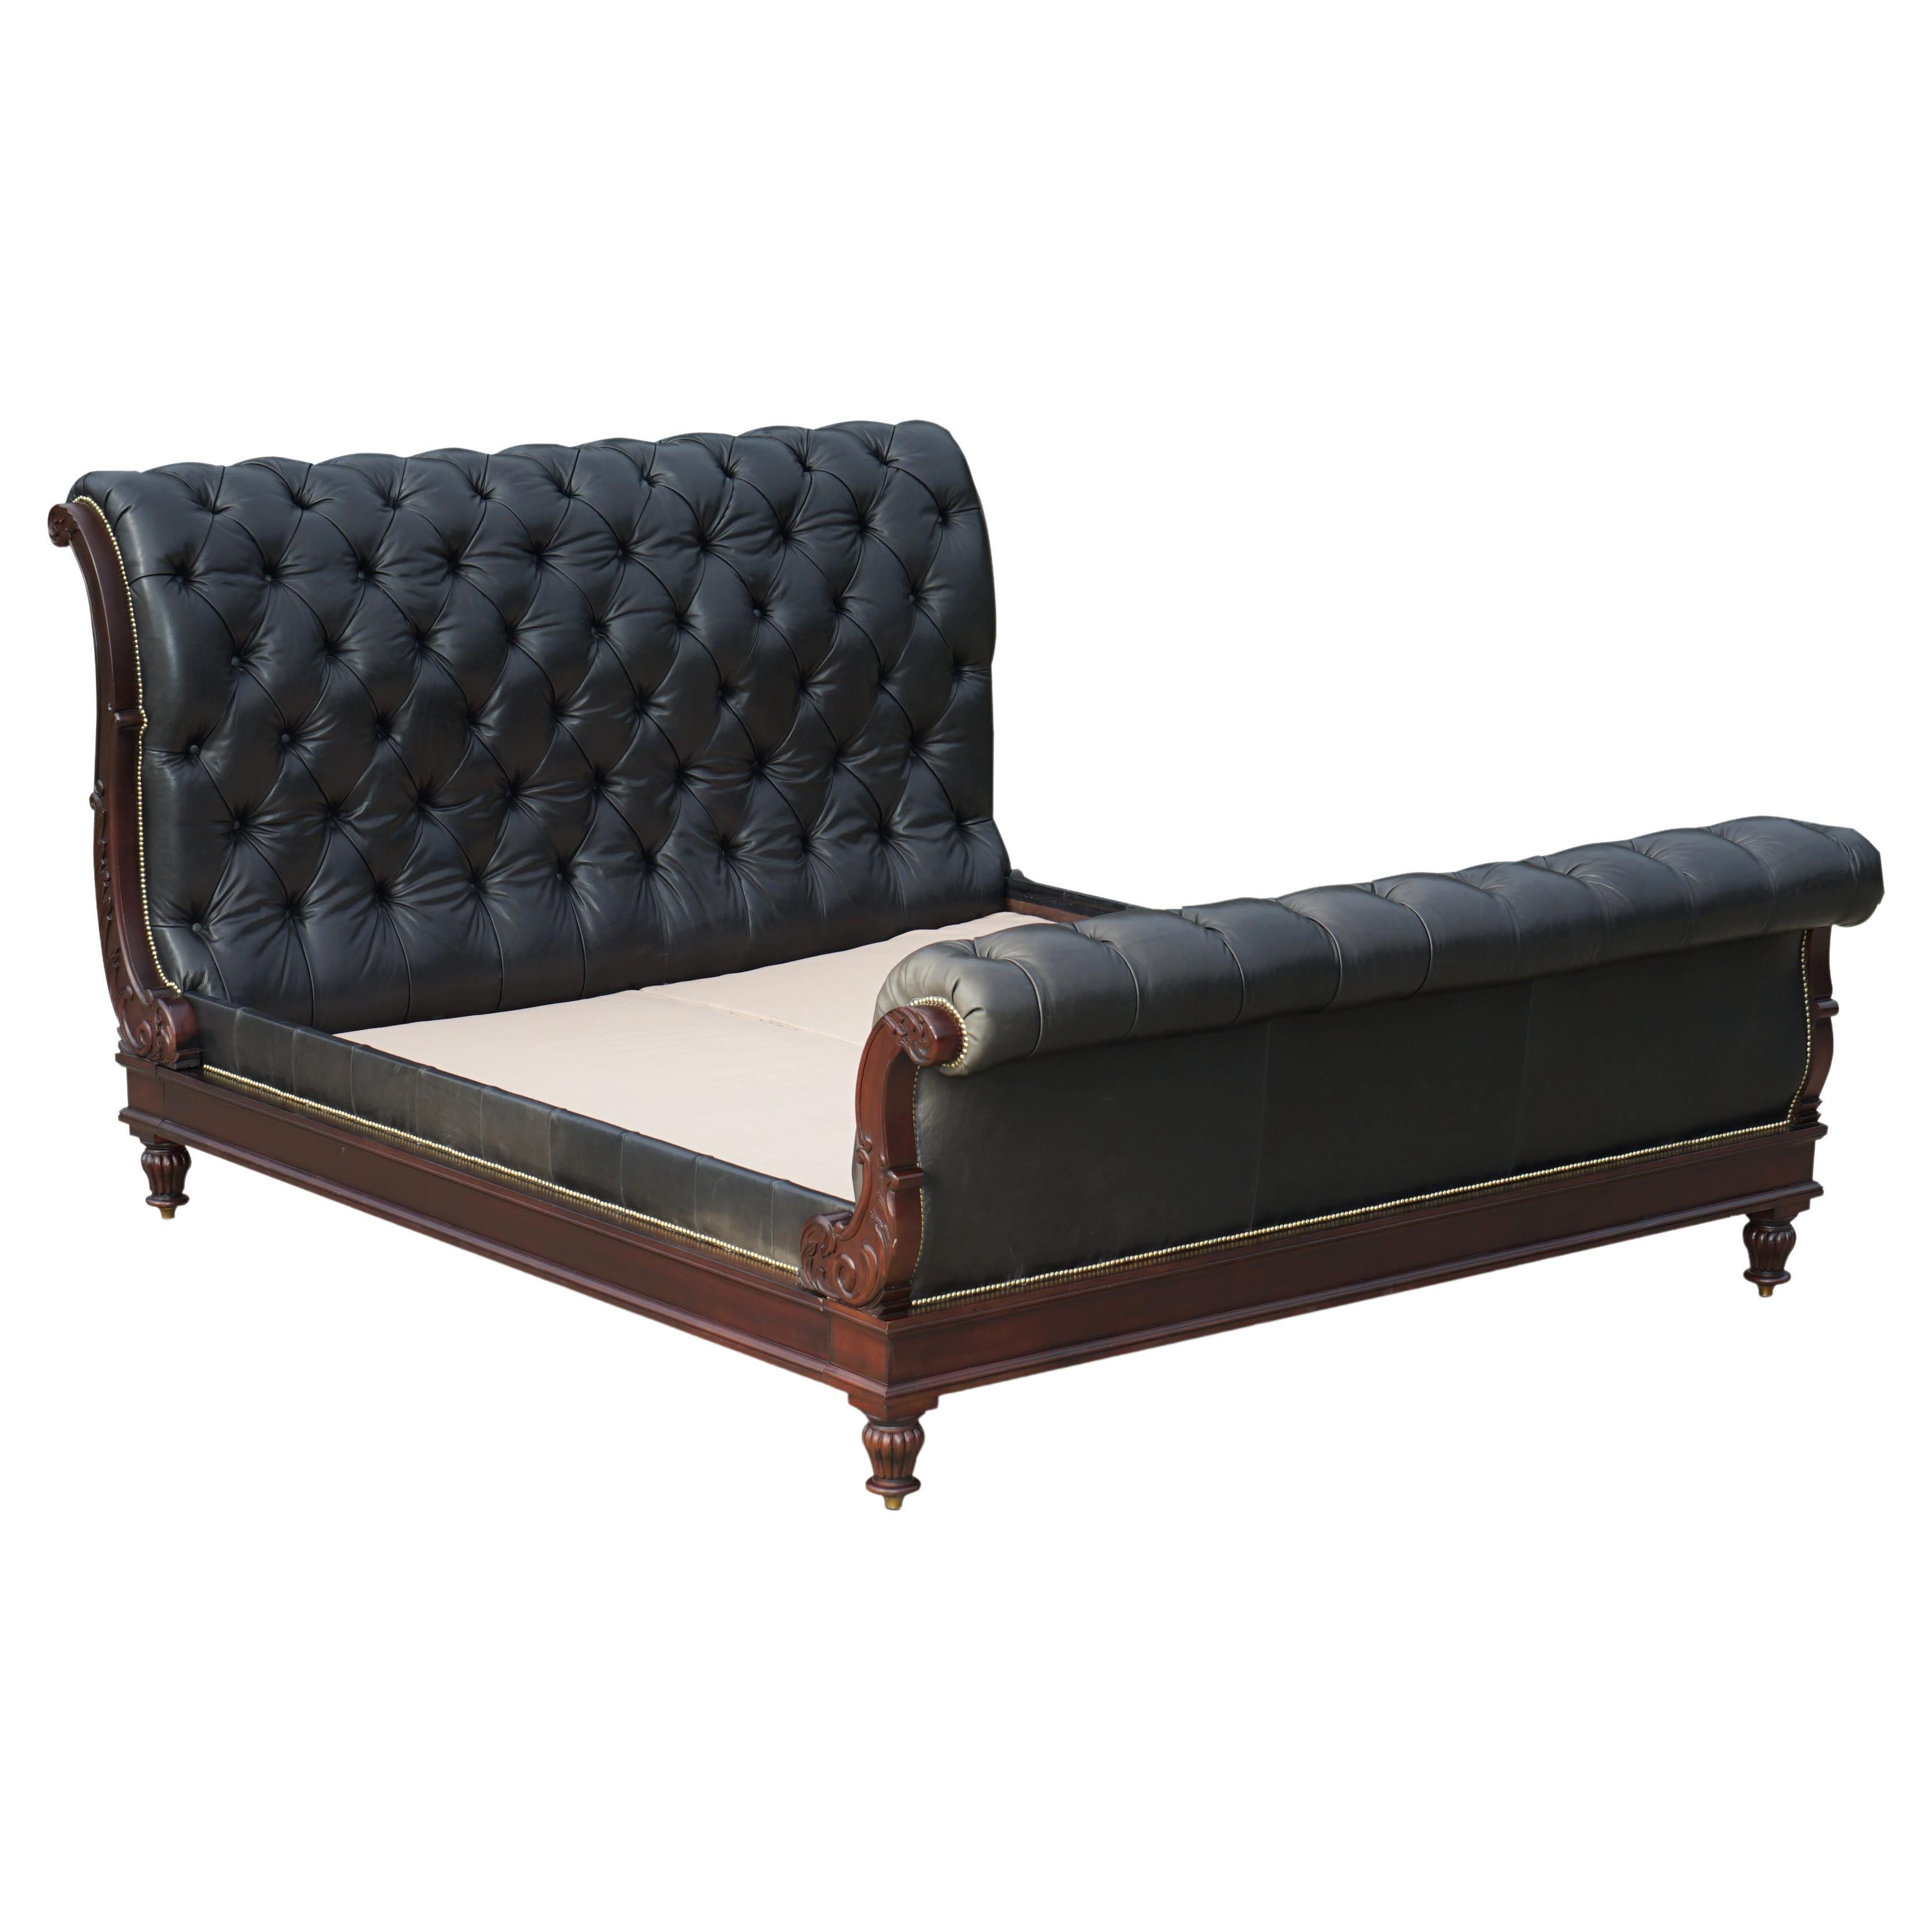 Massive Ralph Lauren Clivedon Black Leather Chesterfield Bed